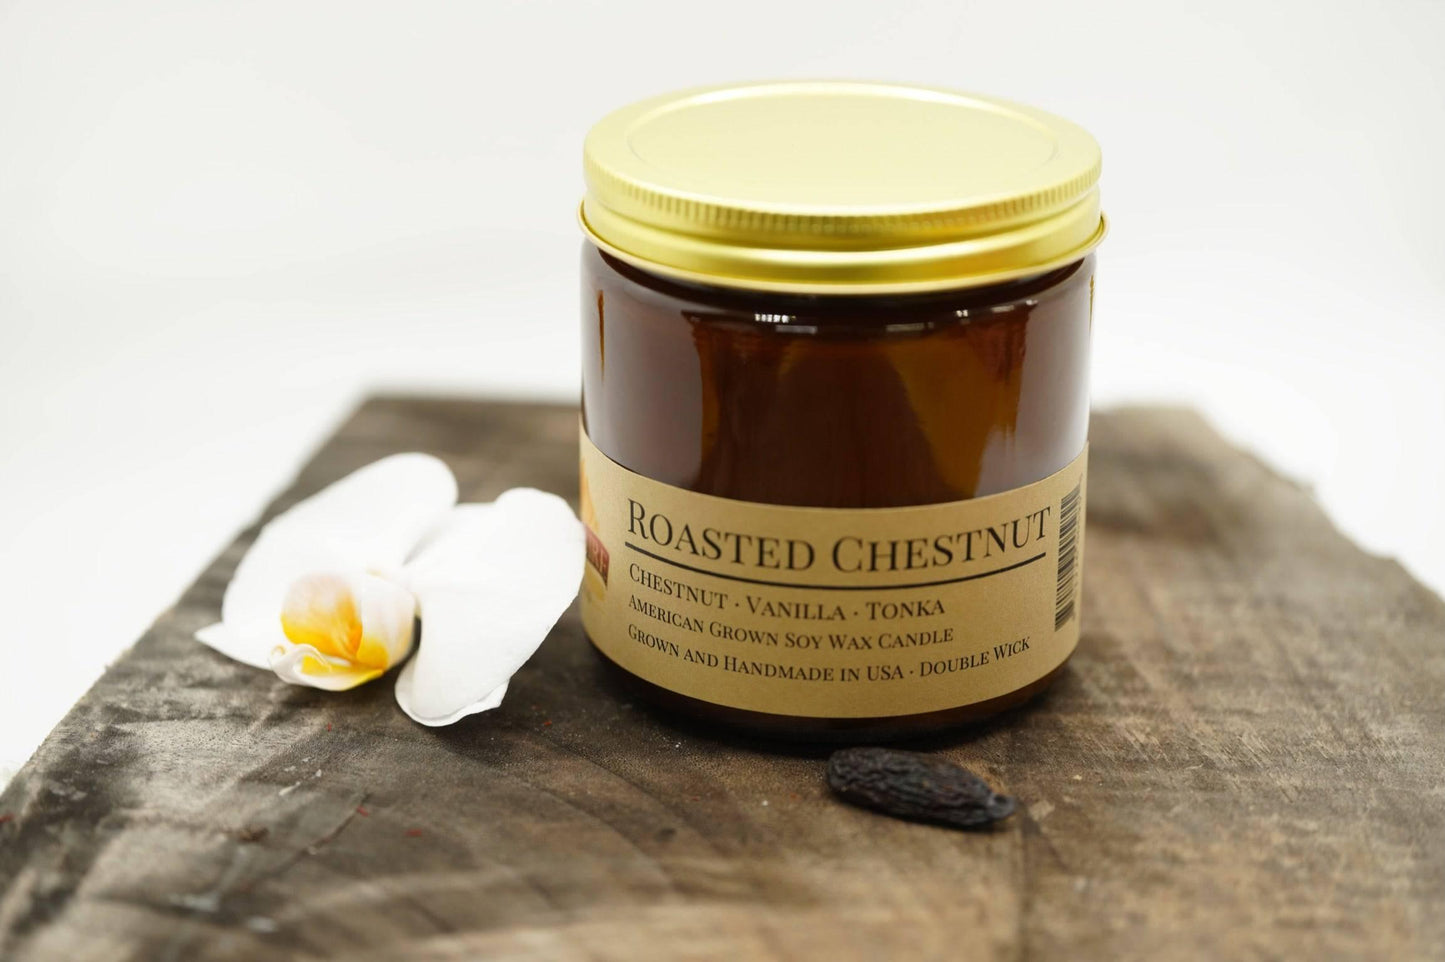 Roasted Chestnut Soy Wax Candle | 16 oz Double Wick Amber Apothecary Jar - Prairie Fire Candles